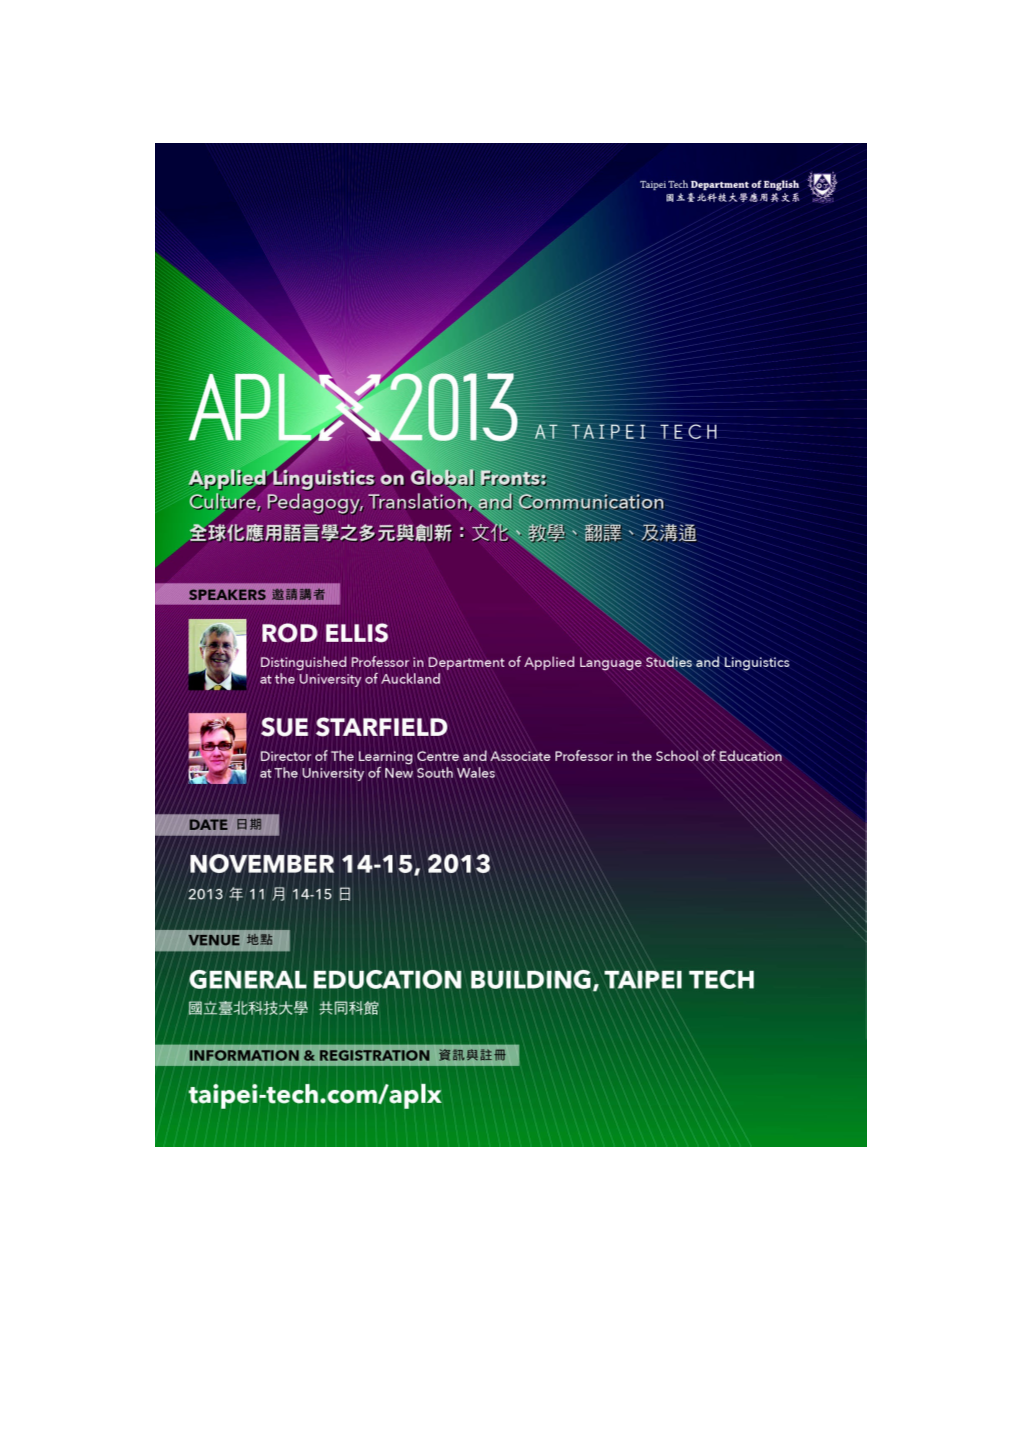 APLX 2013 Conference Schedule